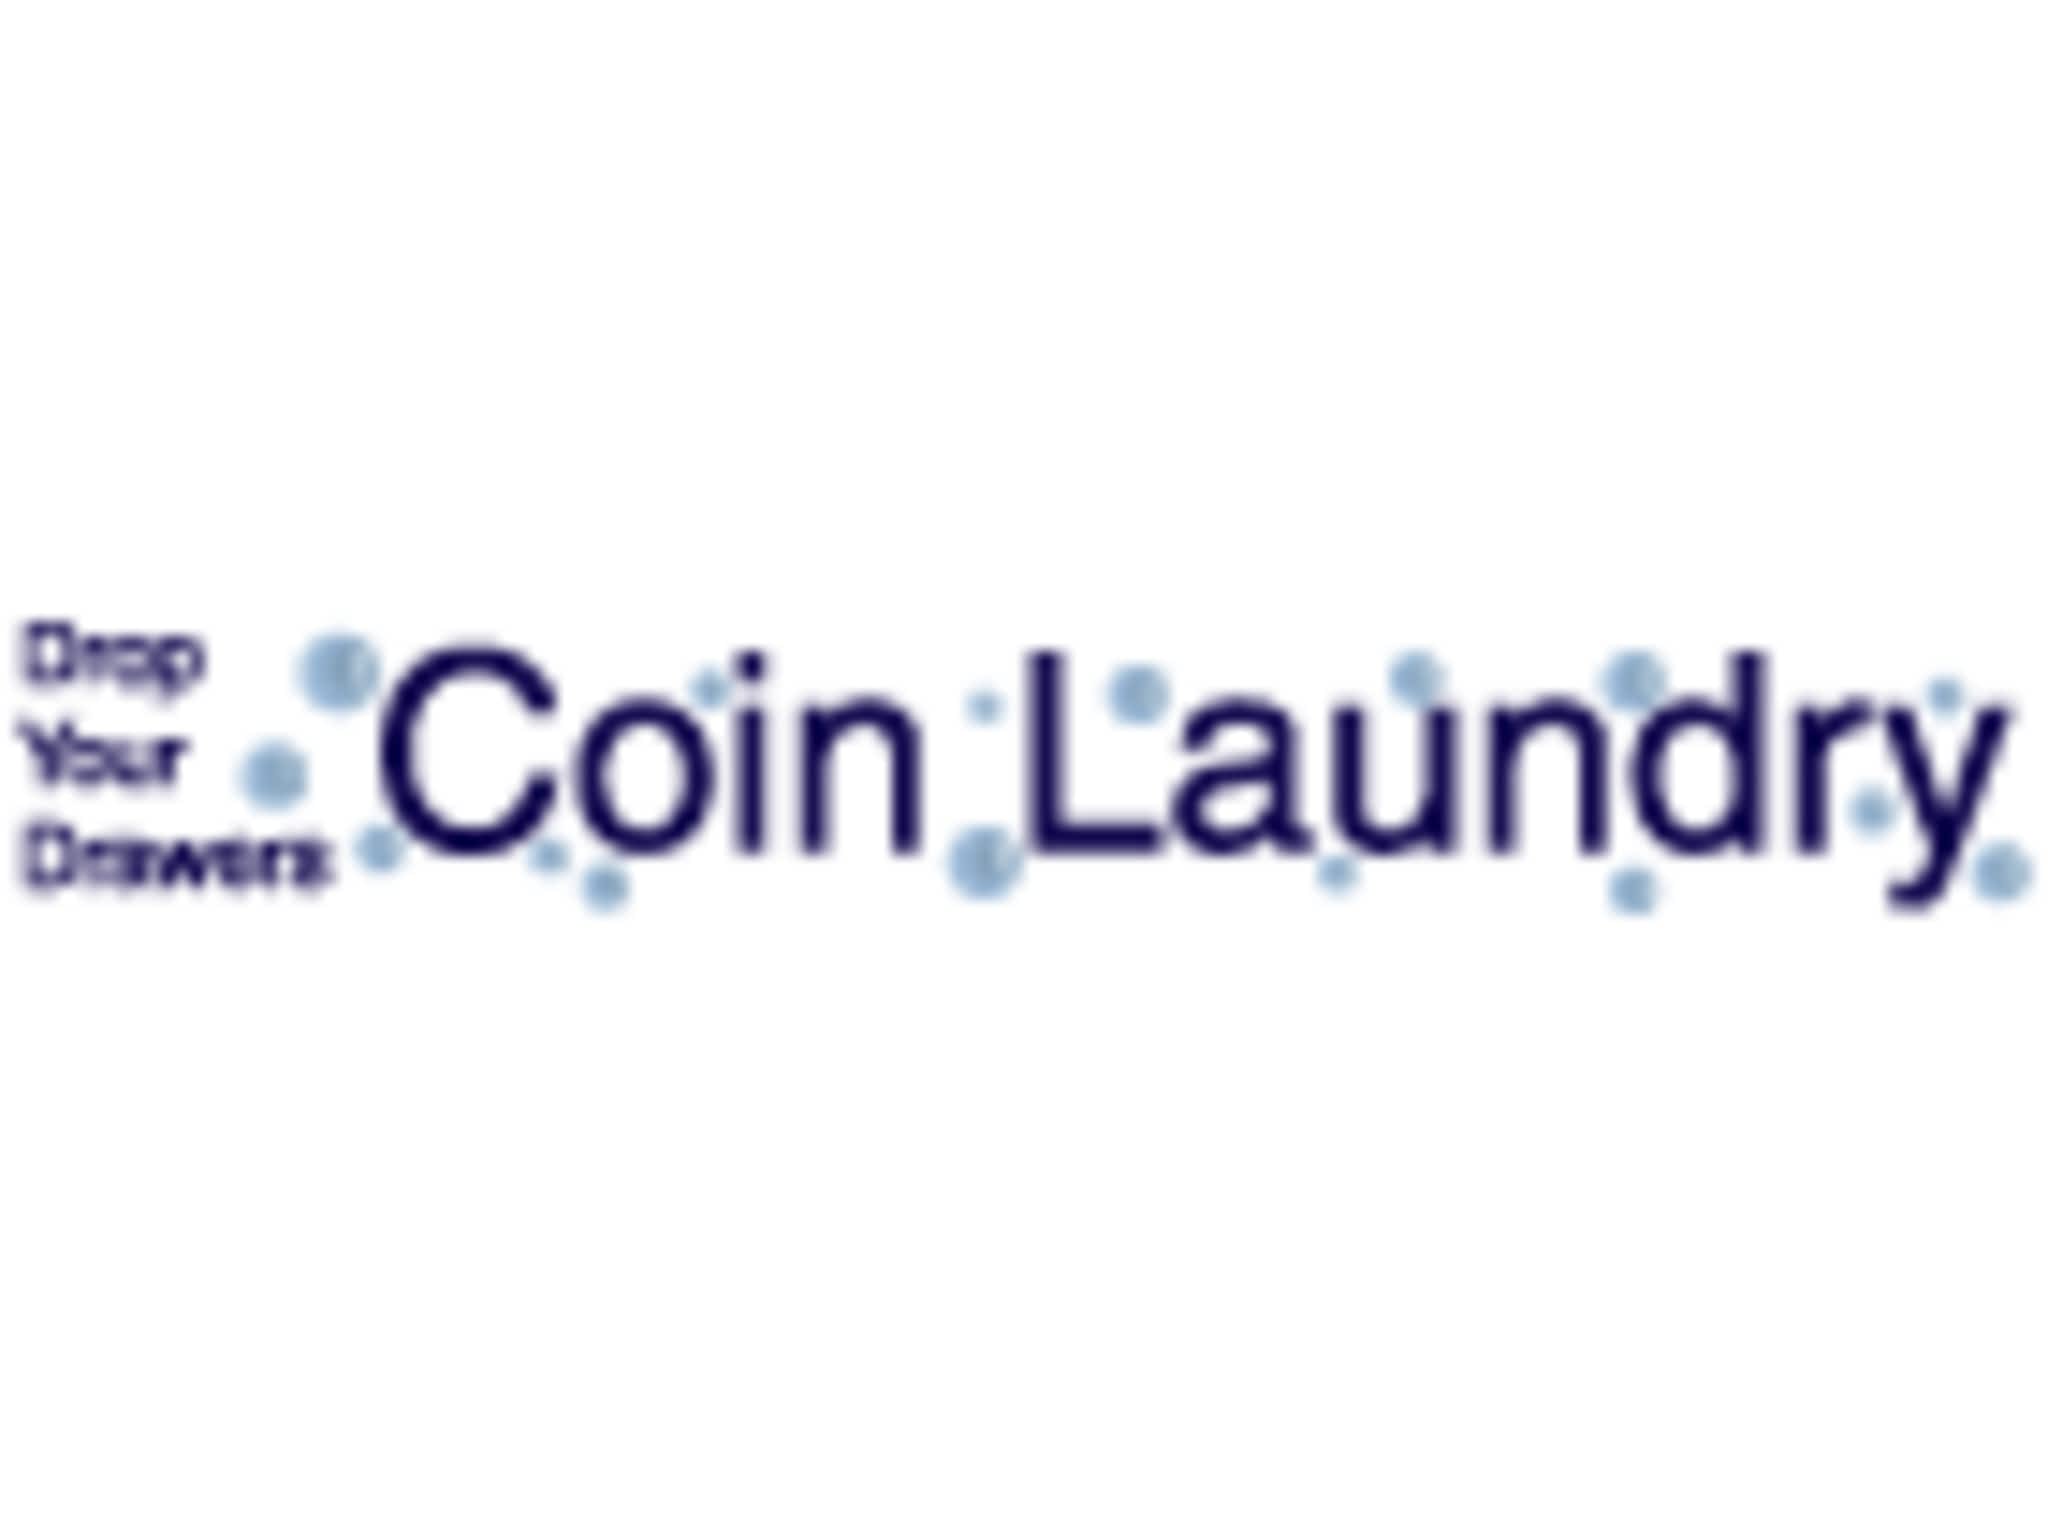 photo Drop Your Drawers Coin Laundry